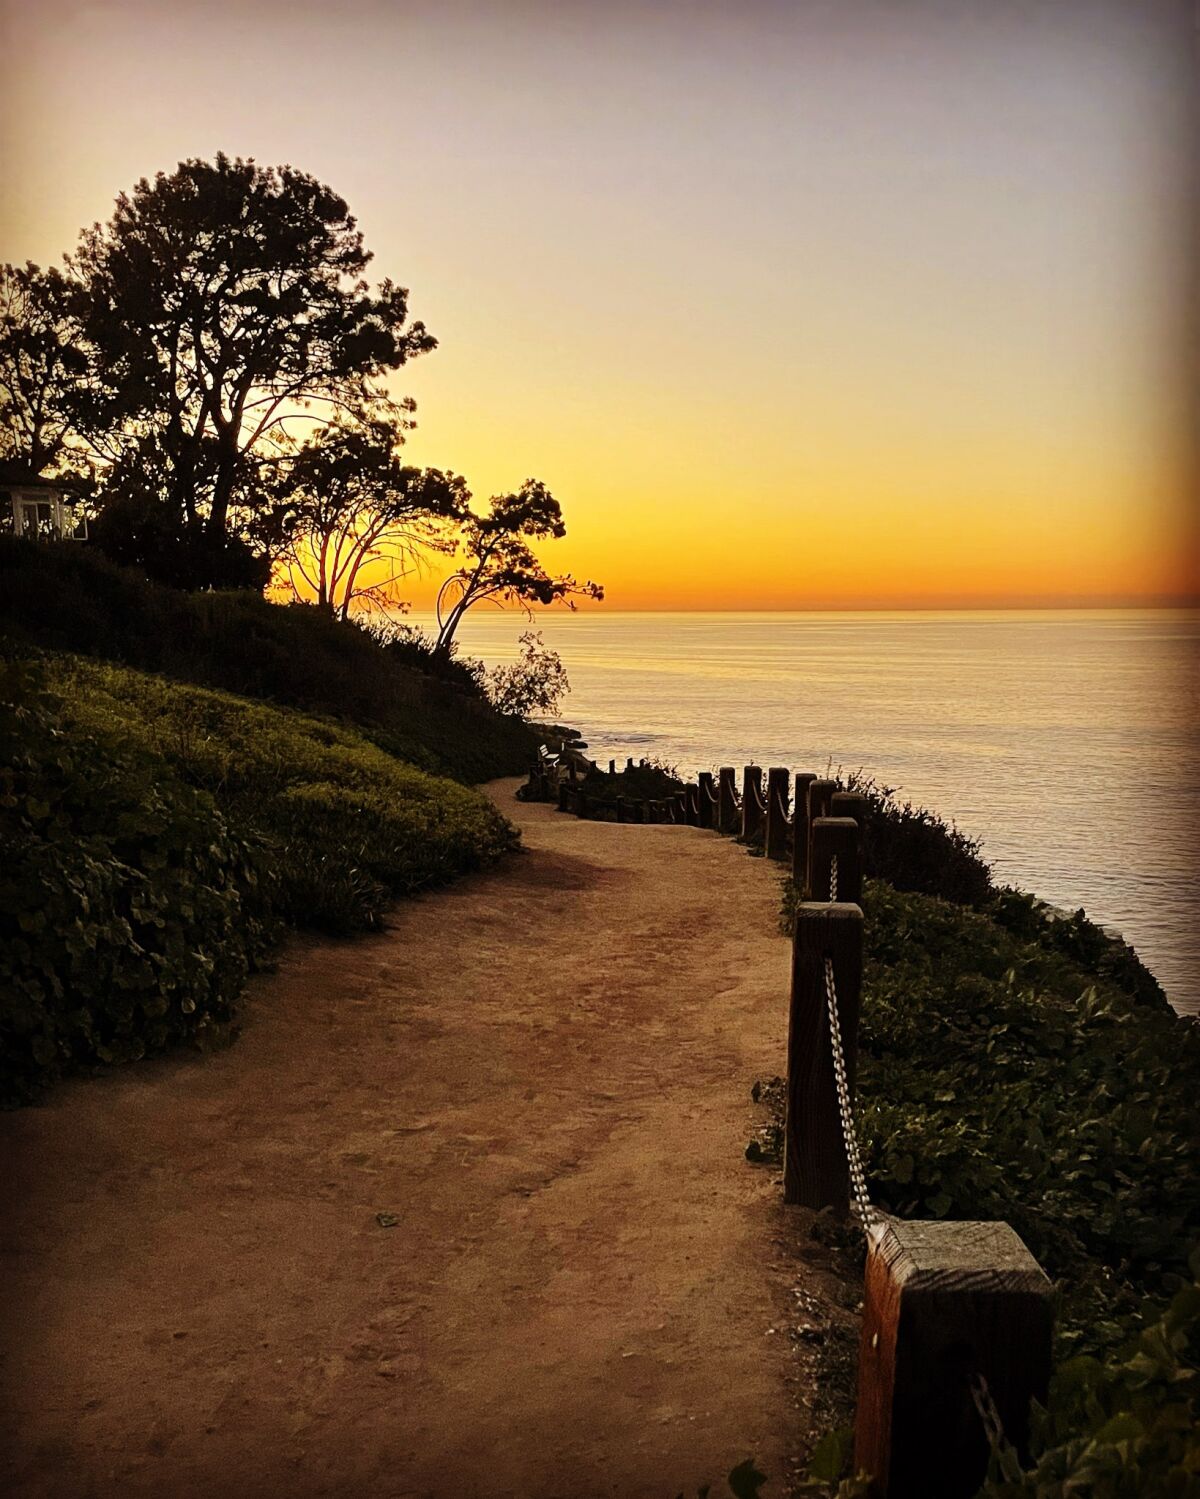 La Jolla's Coast Walk Trail has been rehabilitated and maintained by Friends of Coast Walk Trail.